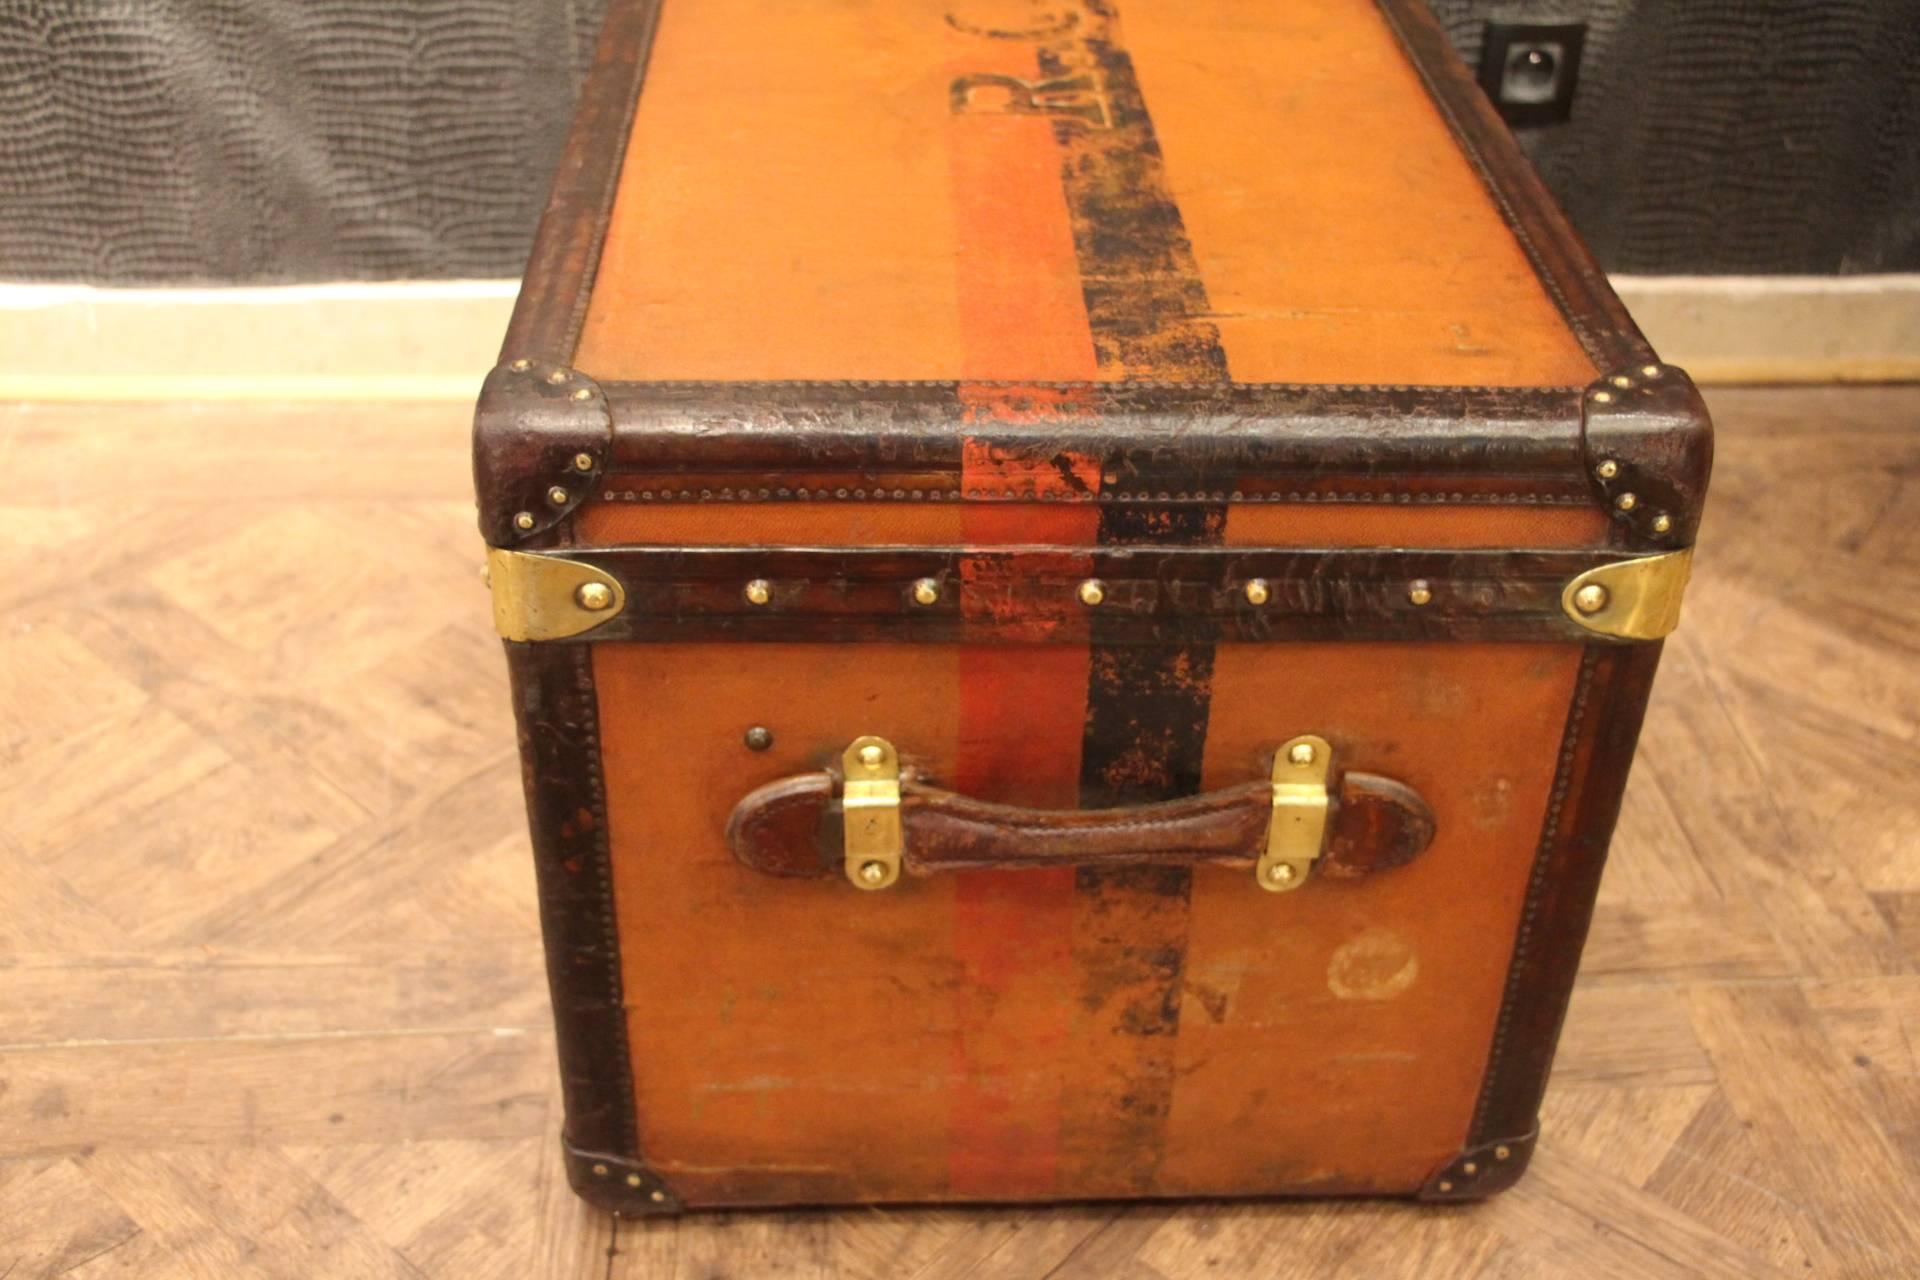 This beautiful little orange Louis Vuitton steamer trunk features leather trim and side handles, as well as brass locks and stamped studs. It has got a deep and warm patina.
Its interior is all original too except its lid that has been perfectly